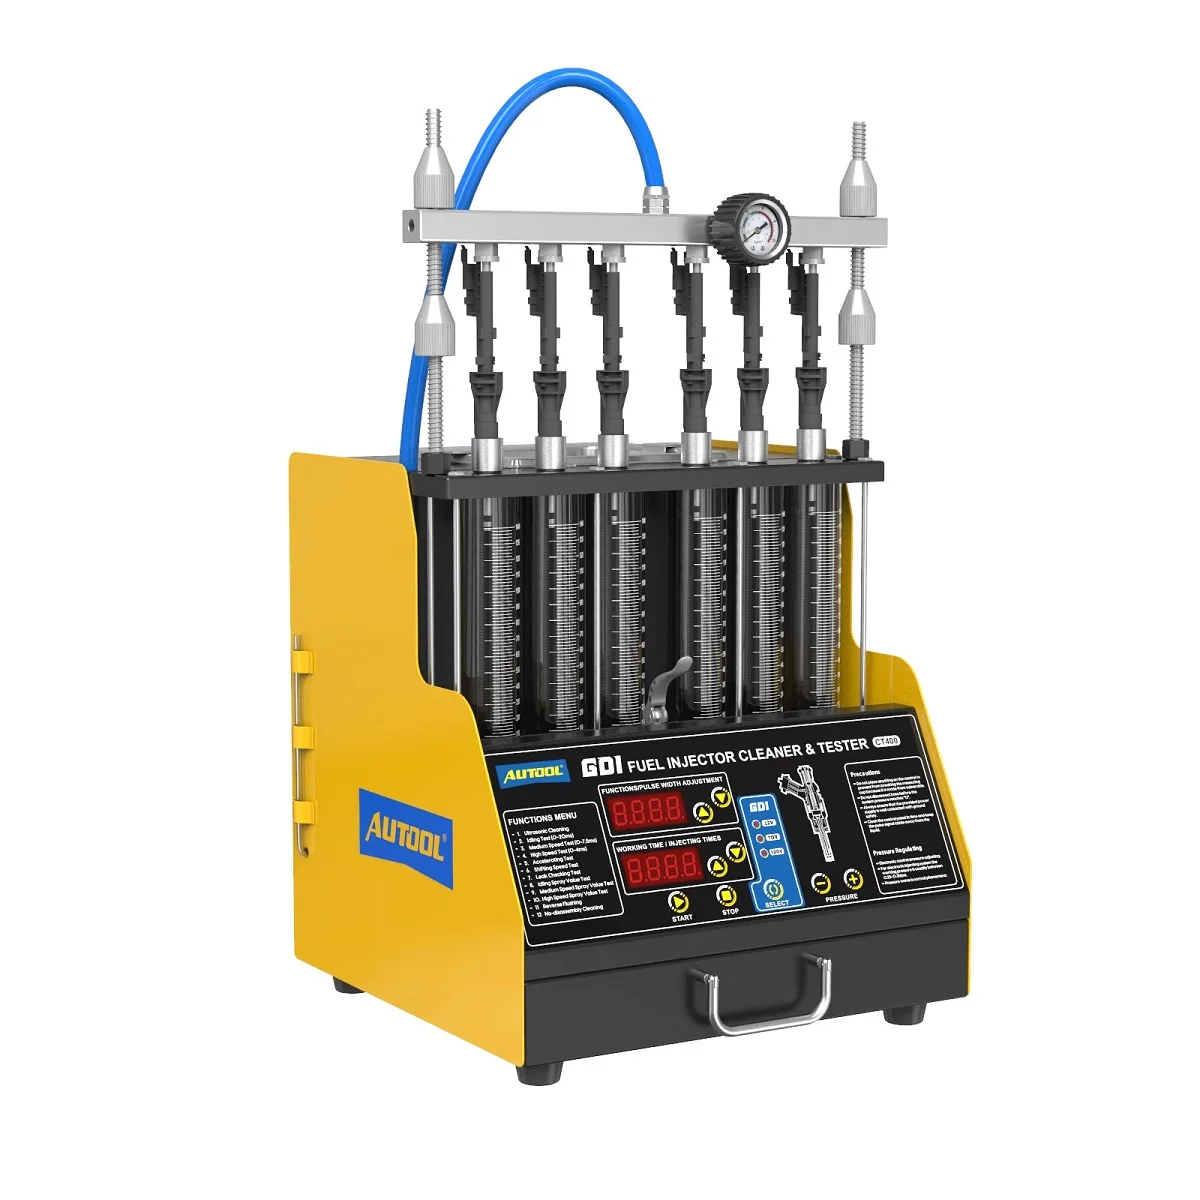 AUTOOL CT400 Fuel Injector Cleaner & Tester - AUTOOL